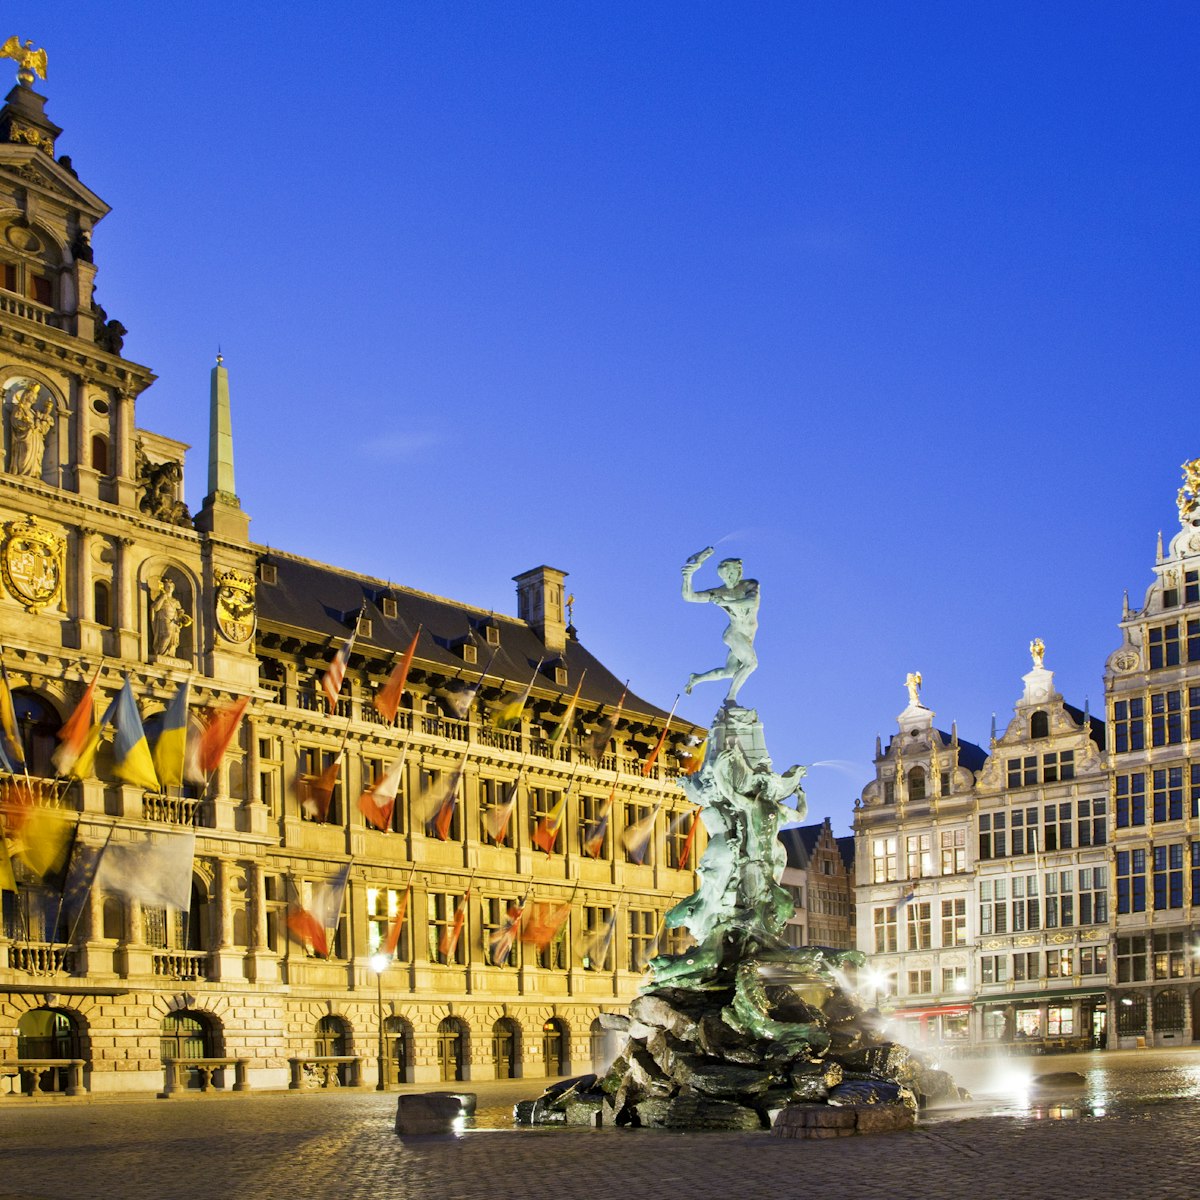 Brabo fountain and medieval houses in the Grote Martk in Antwerp. (Photo by: Loop Images/UIG via Getty Images)